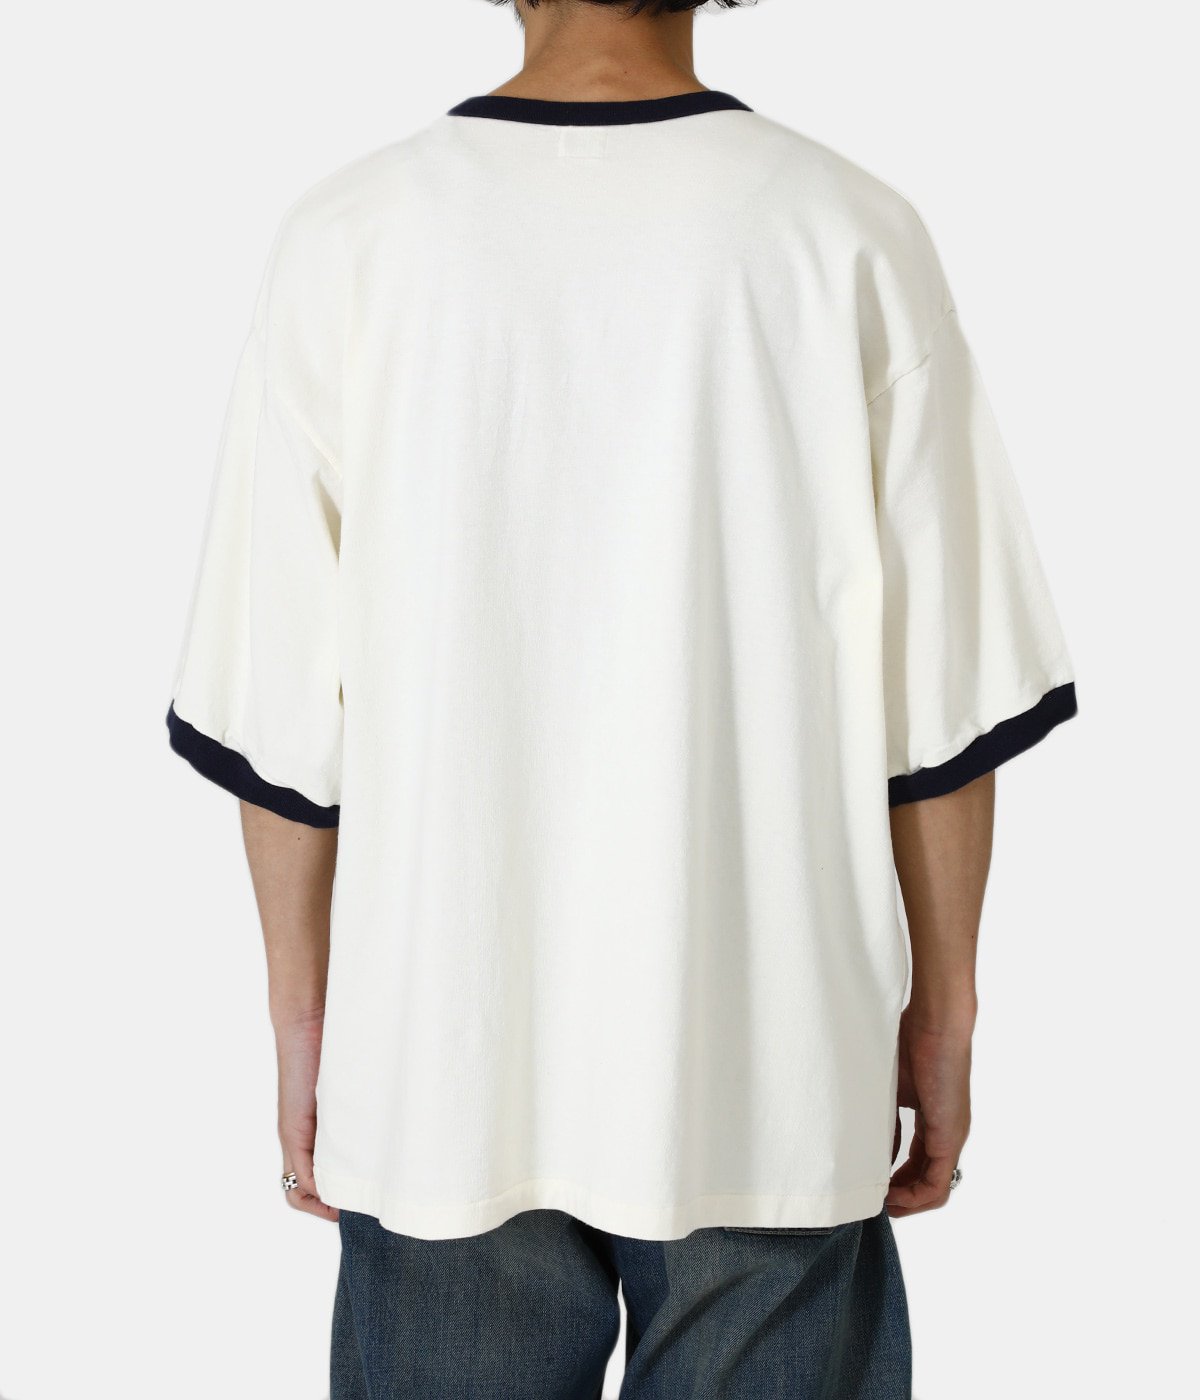 【ONLY ARK】別注 Cotton Rayon 88/12 Trim Tee ARK